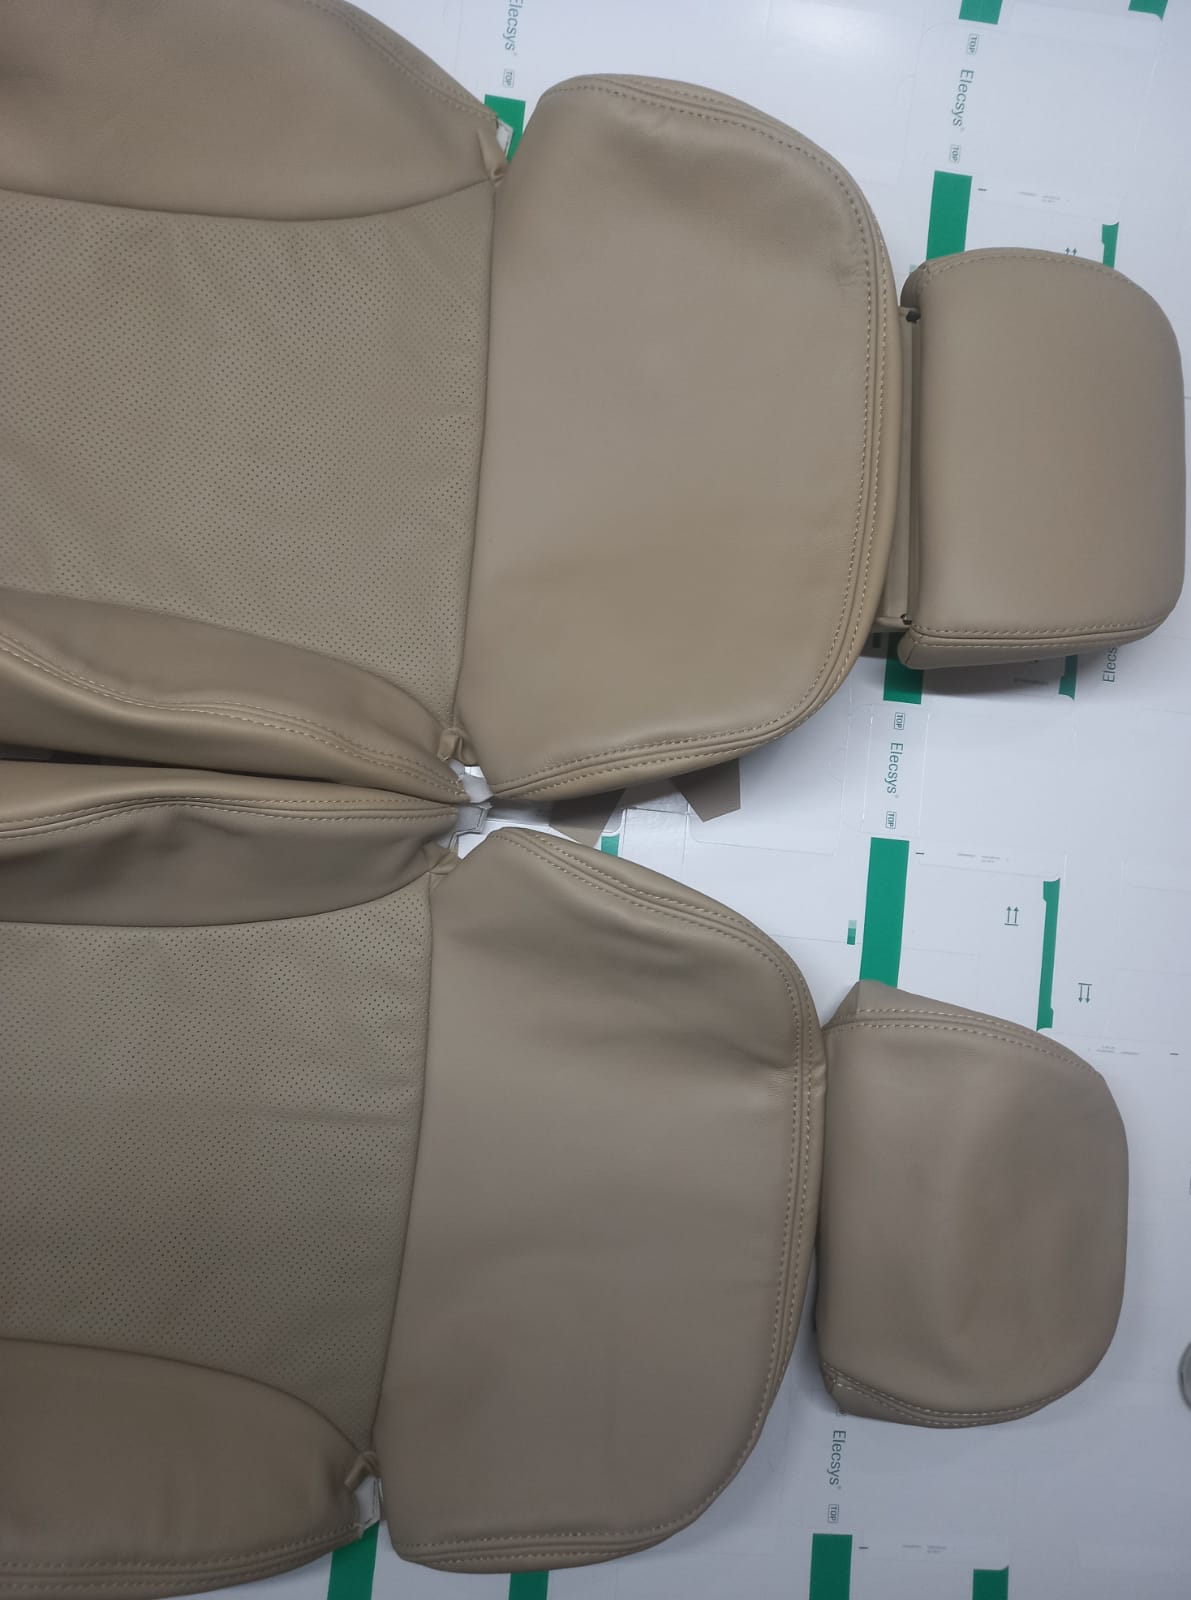 Lexus GS350 / GS330 / GS450h / GS460 (Year: 2006 to 2011) Synthetic Leather - Full Set